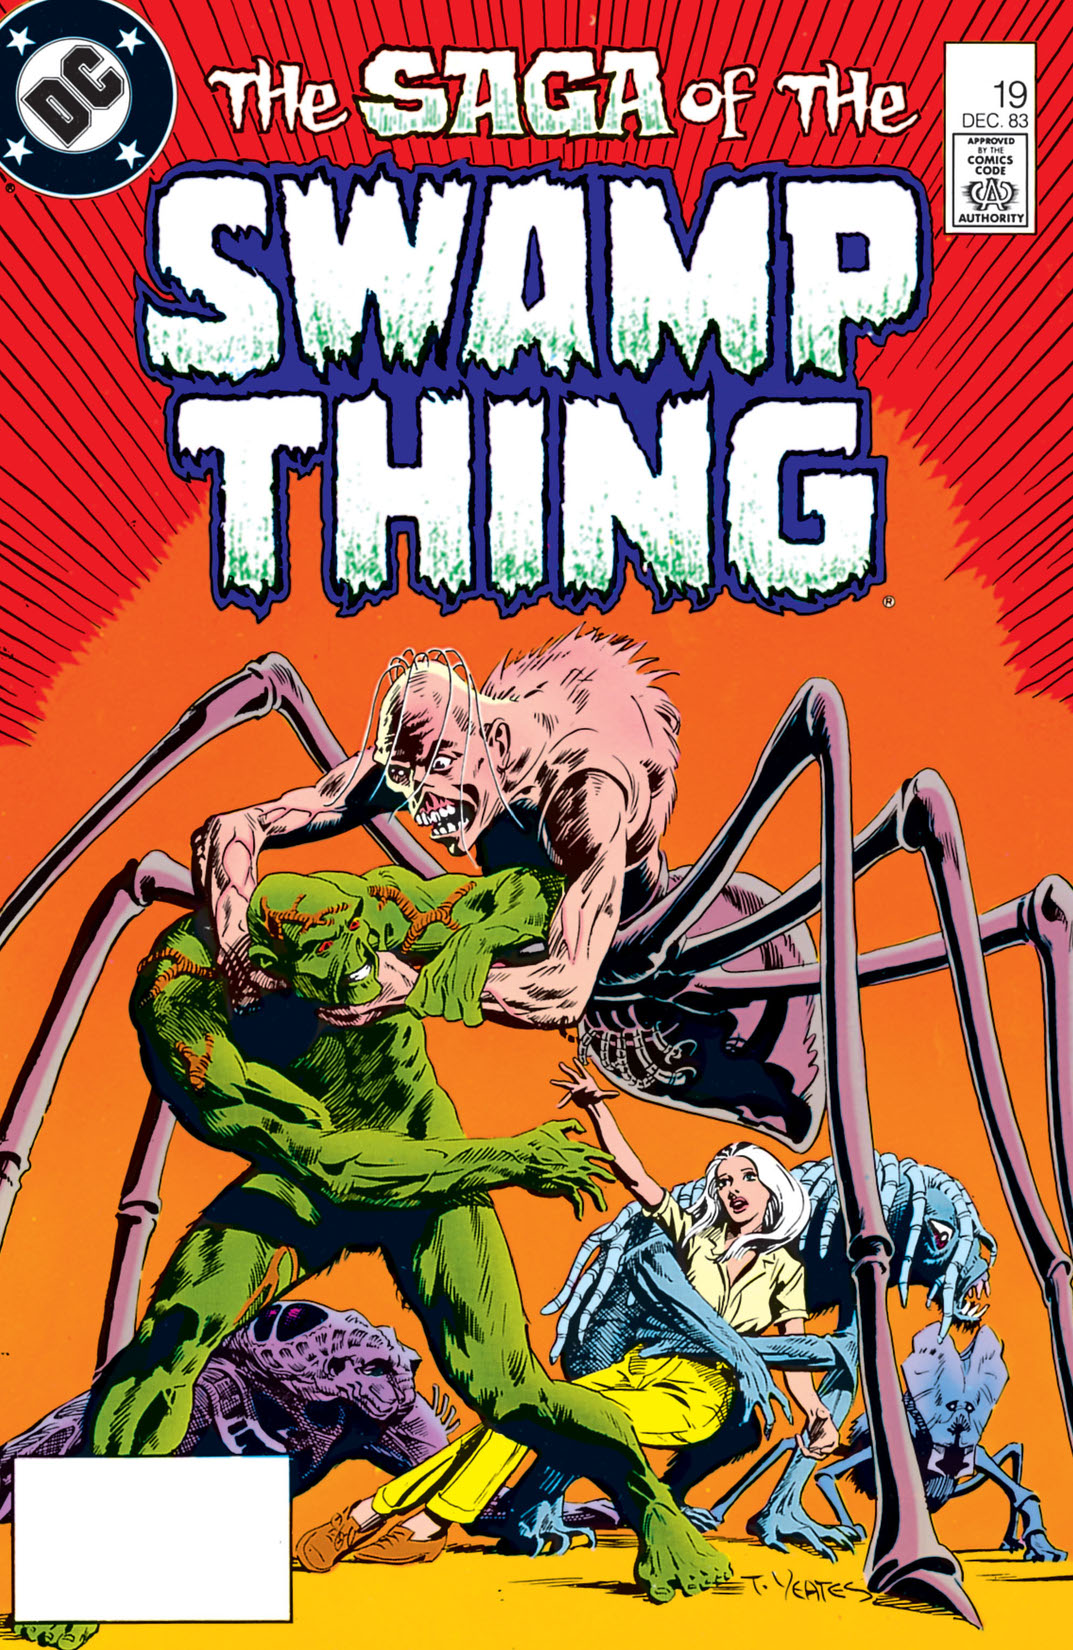 The Saga of the Swamp Thing (1982-) #19 preview images